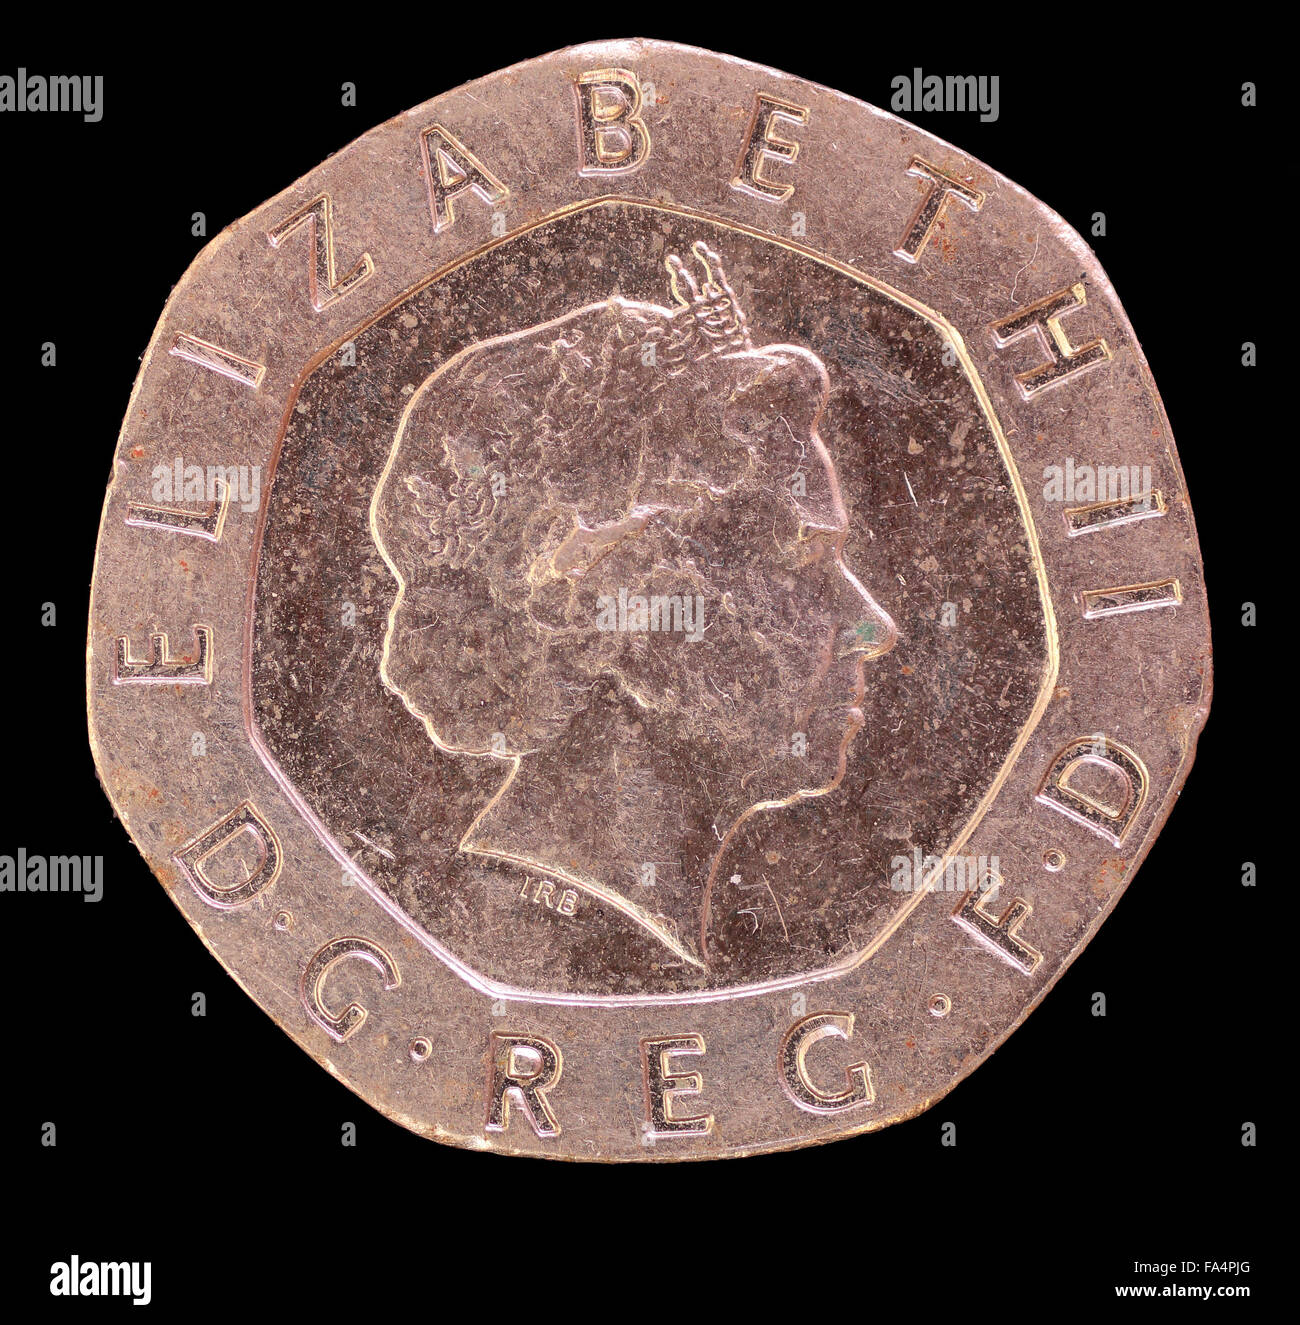 The head face of twenty pence coin, issued by United Kingdom in 2006, depicting the portrait of Queen Elizabeth. Image isolated Stock Photo